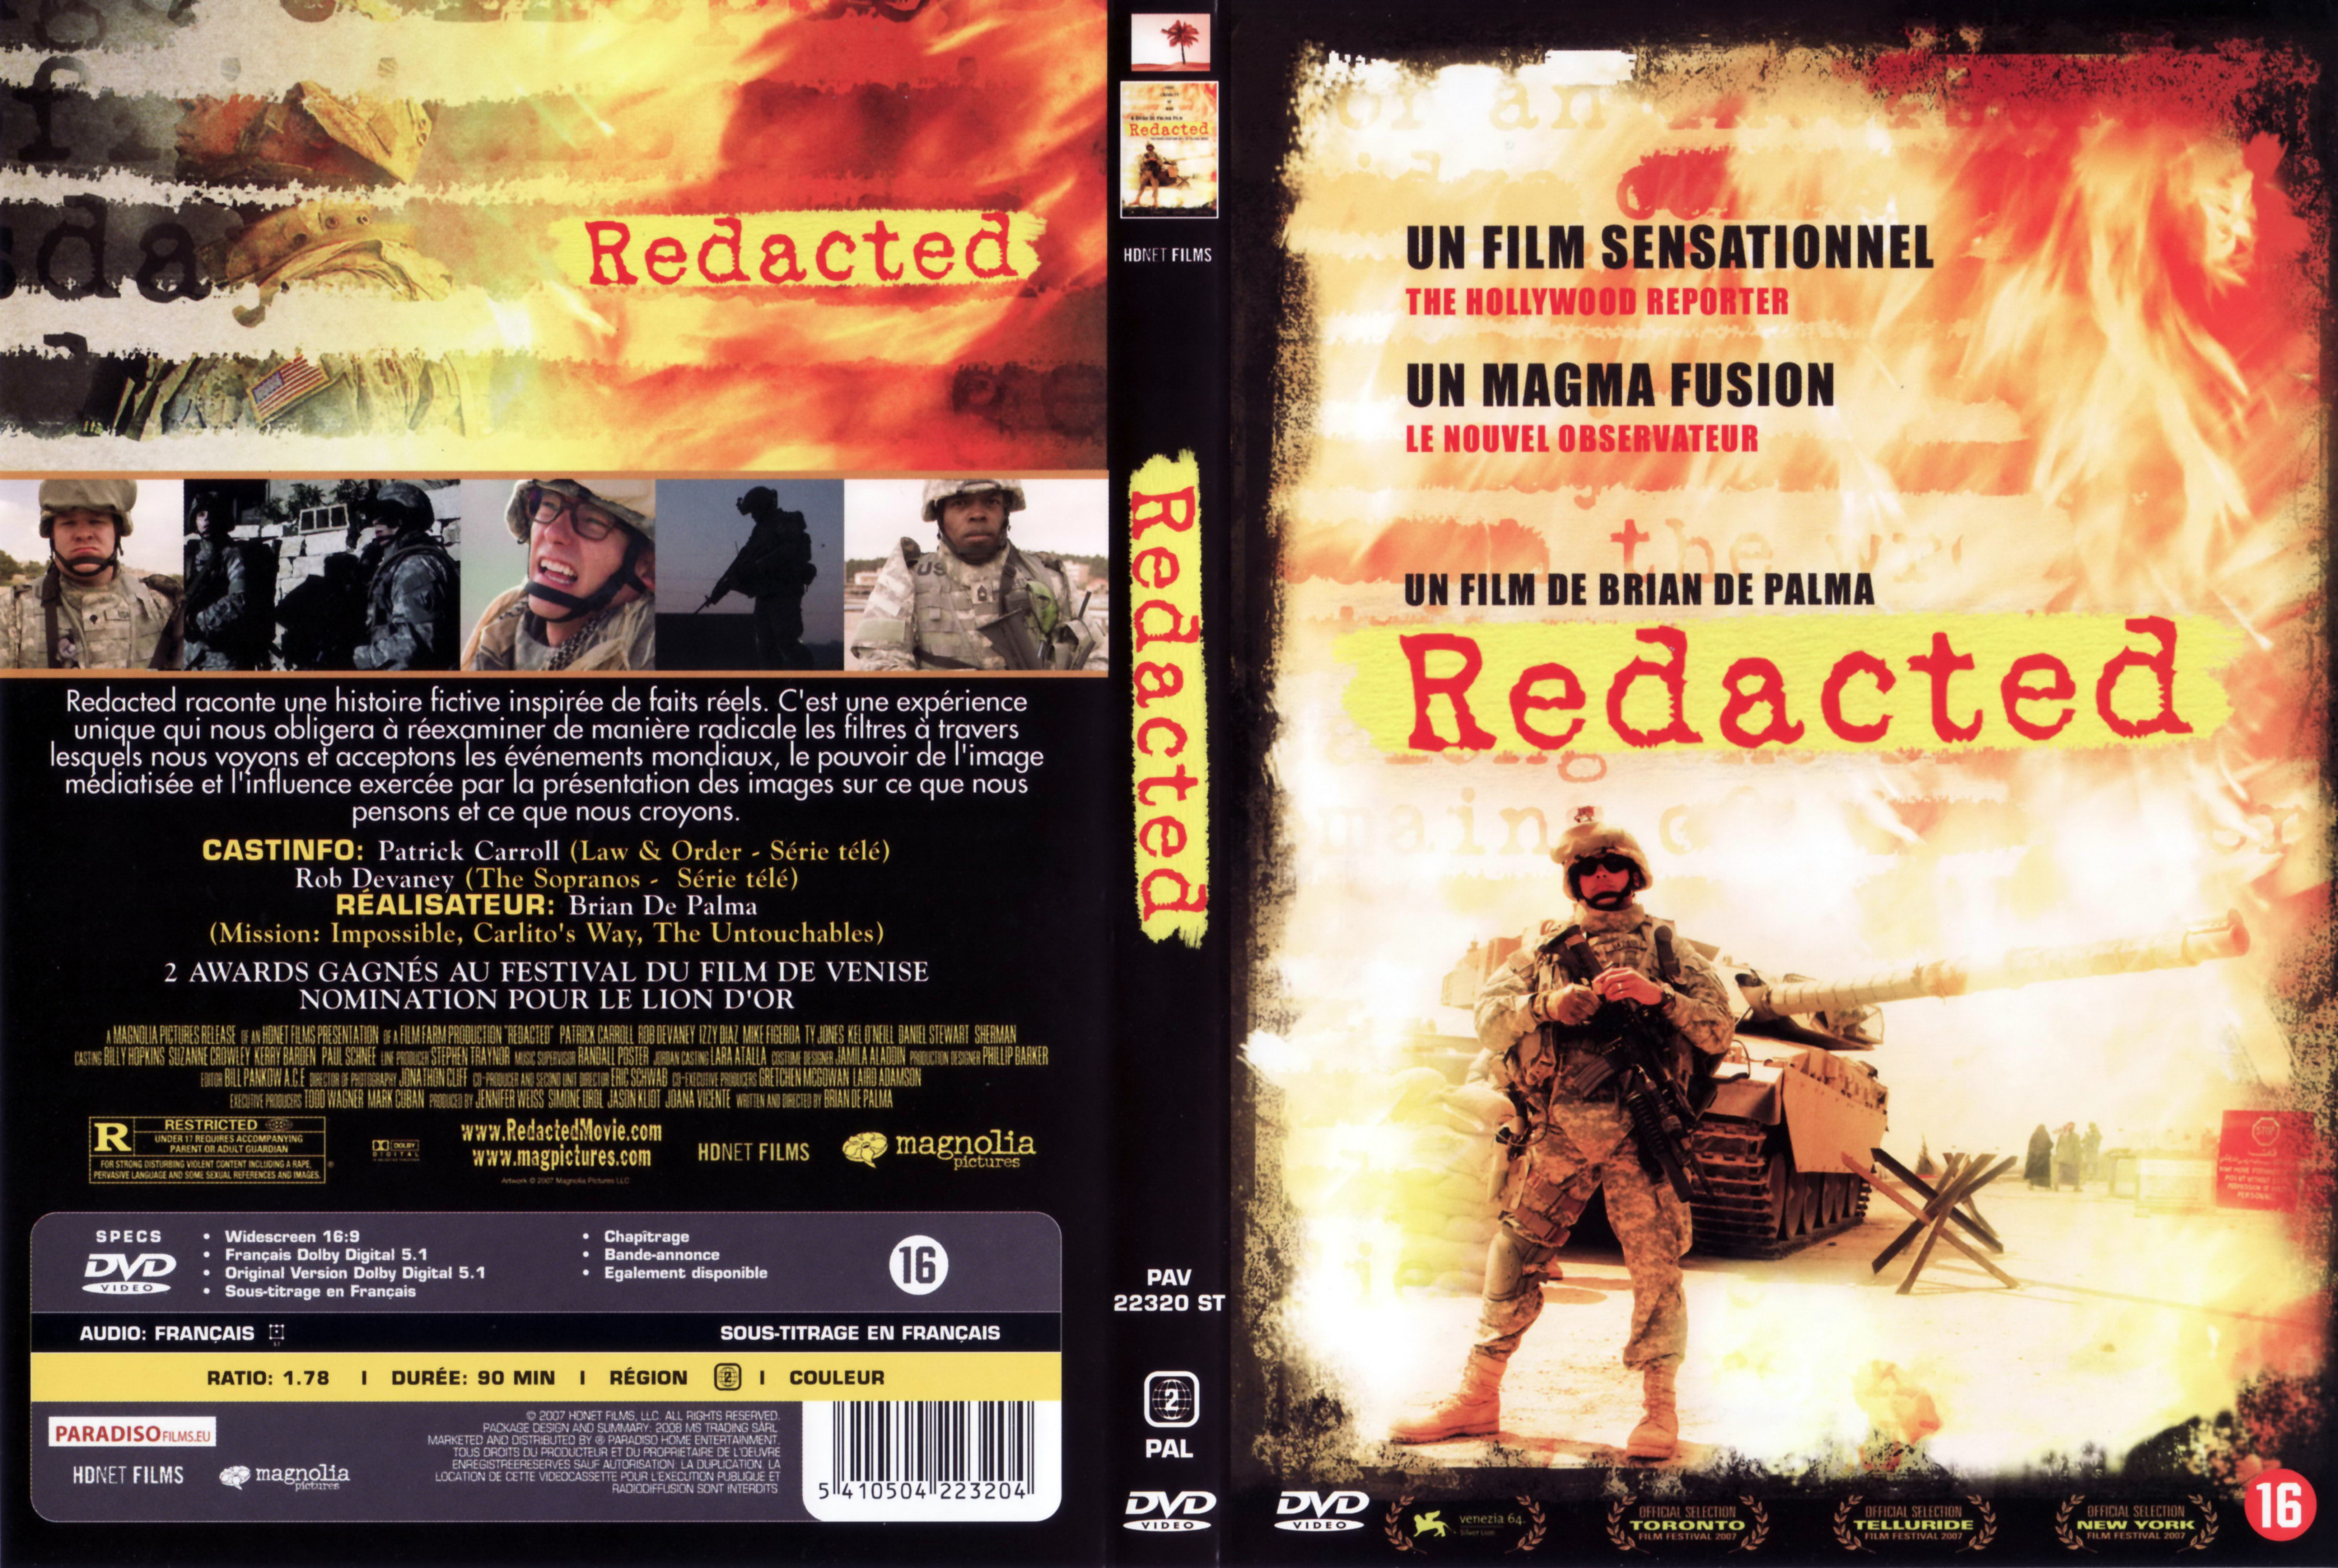 Jaquette DVD Redacted